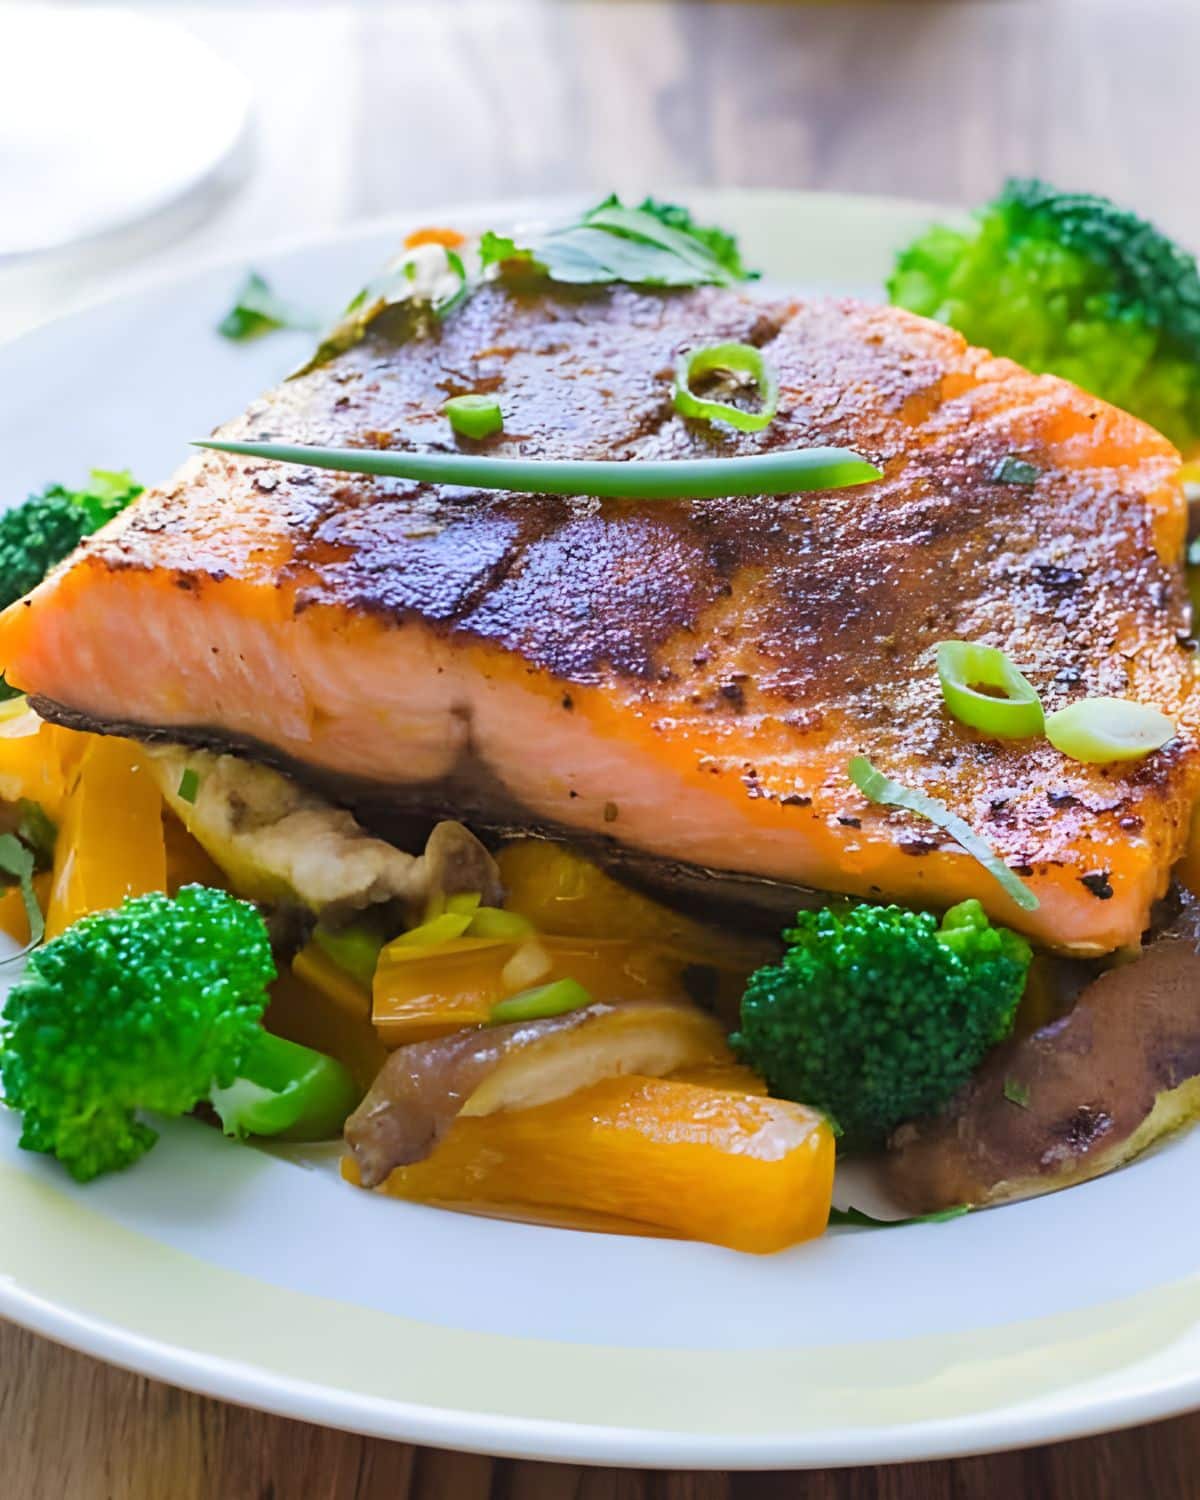 Spiced pan seared salmon over vegetables.